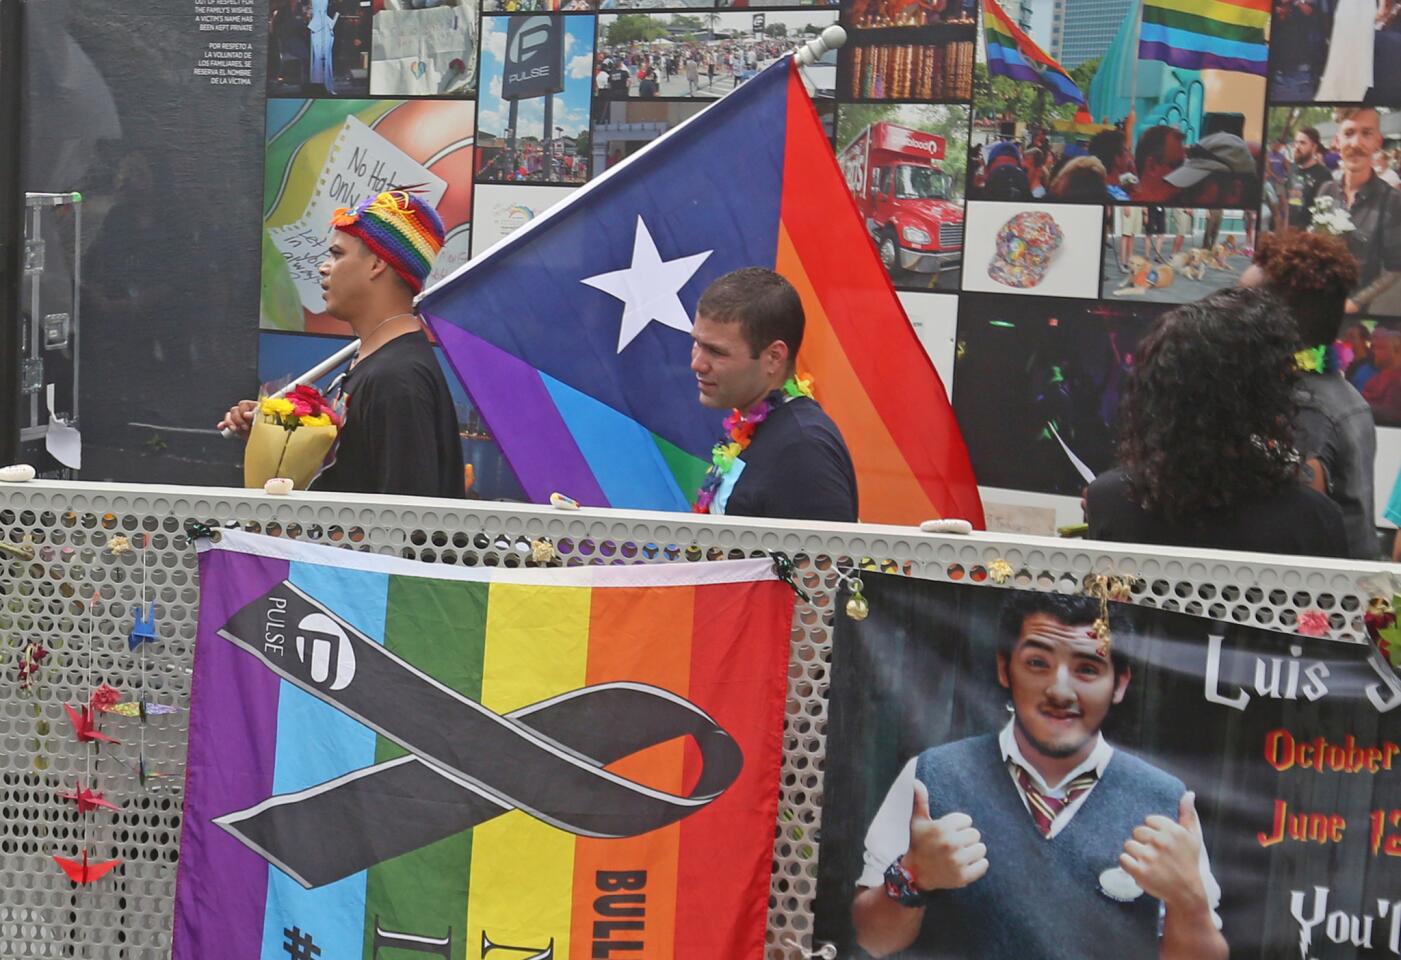 Ceremony honors 49 lost in Pulse massacre